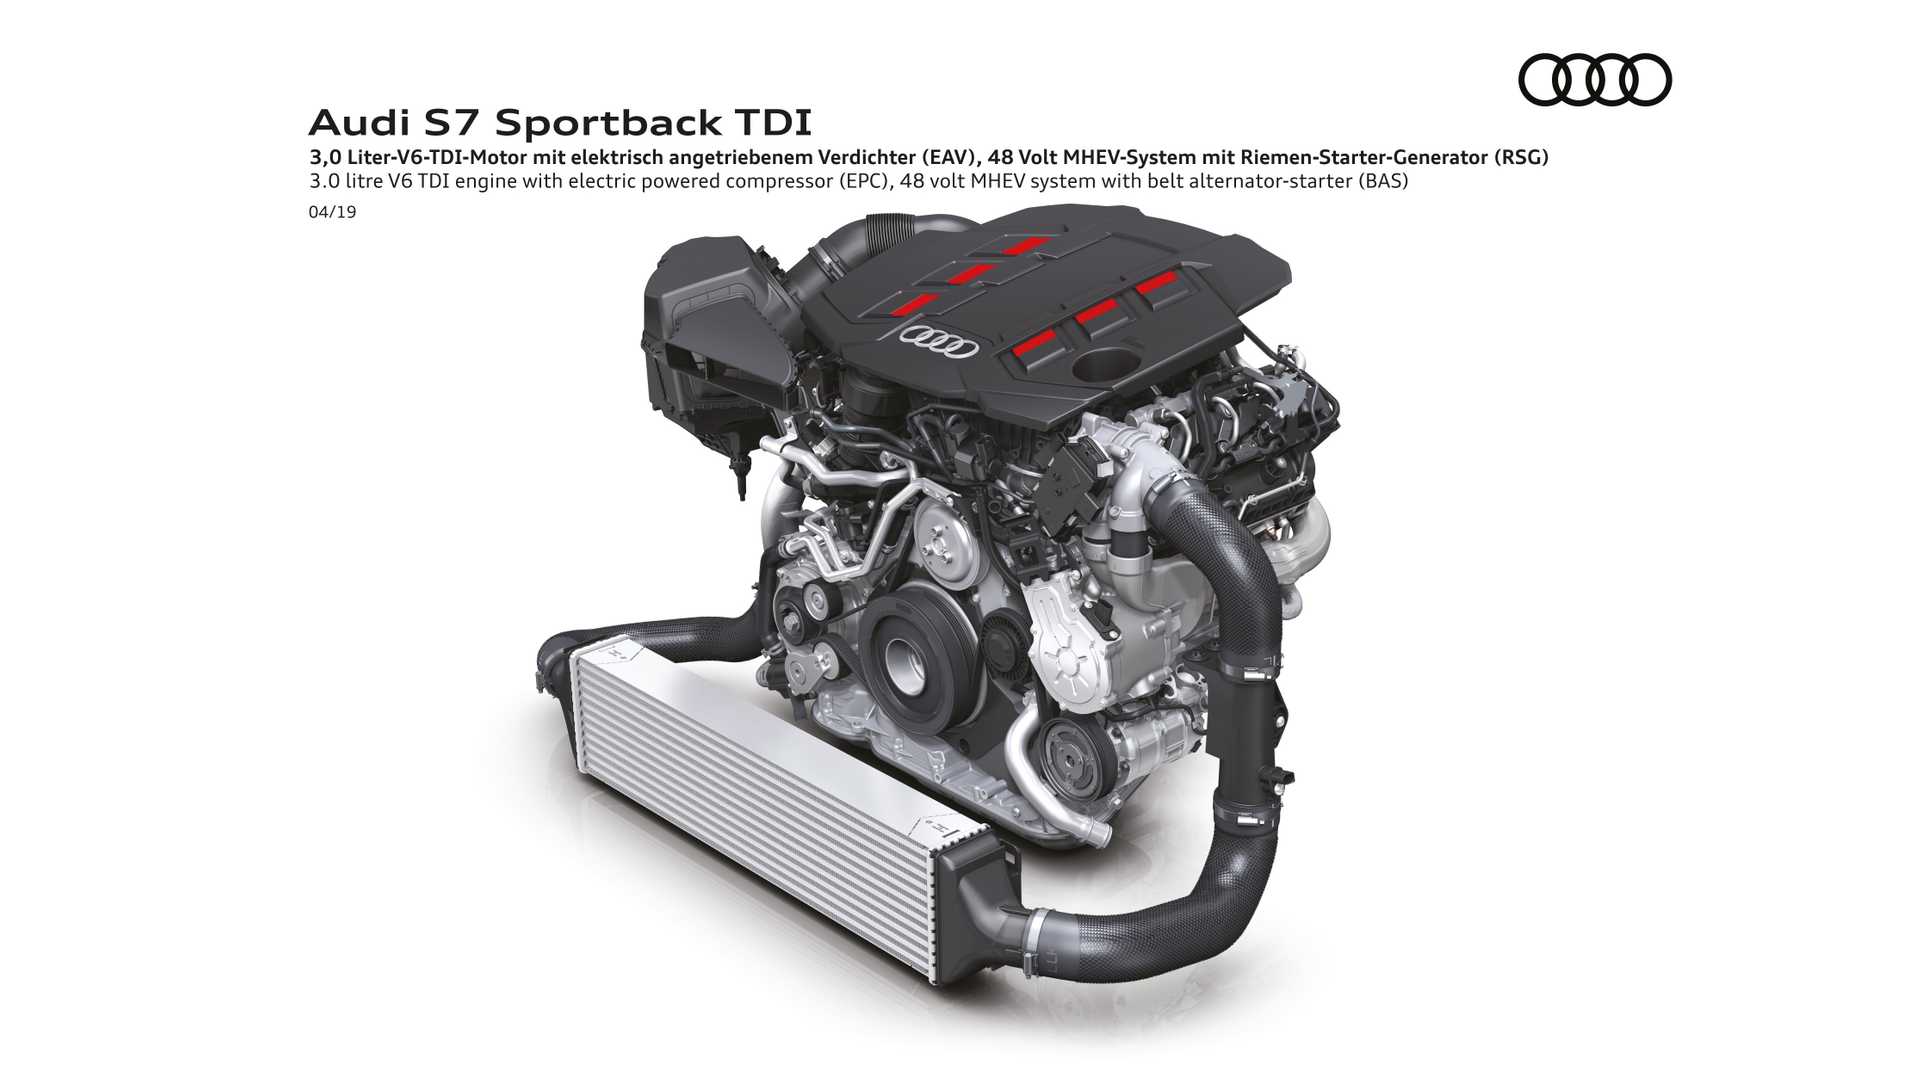 2019 Audi S7 Sportback TDI 3.0 litre V6 TDI engine with electric powered compressor (EPC) Wallpapers #21 of 23